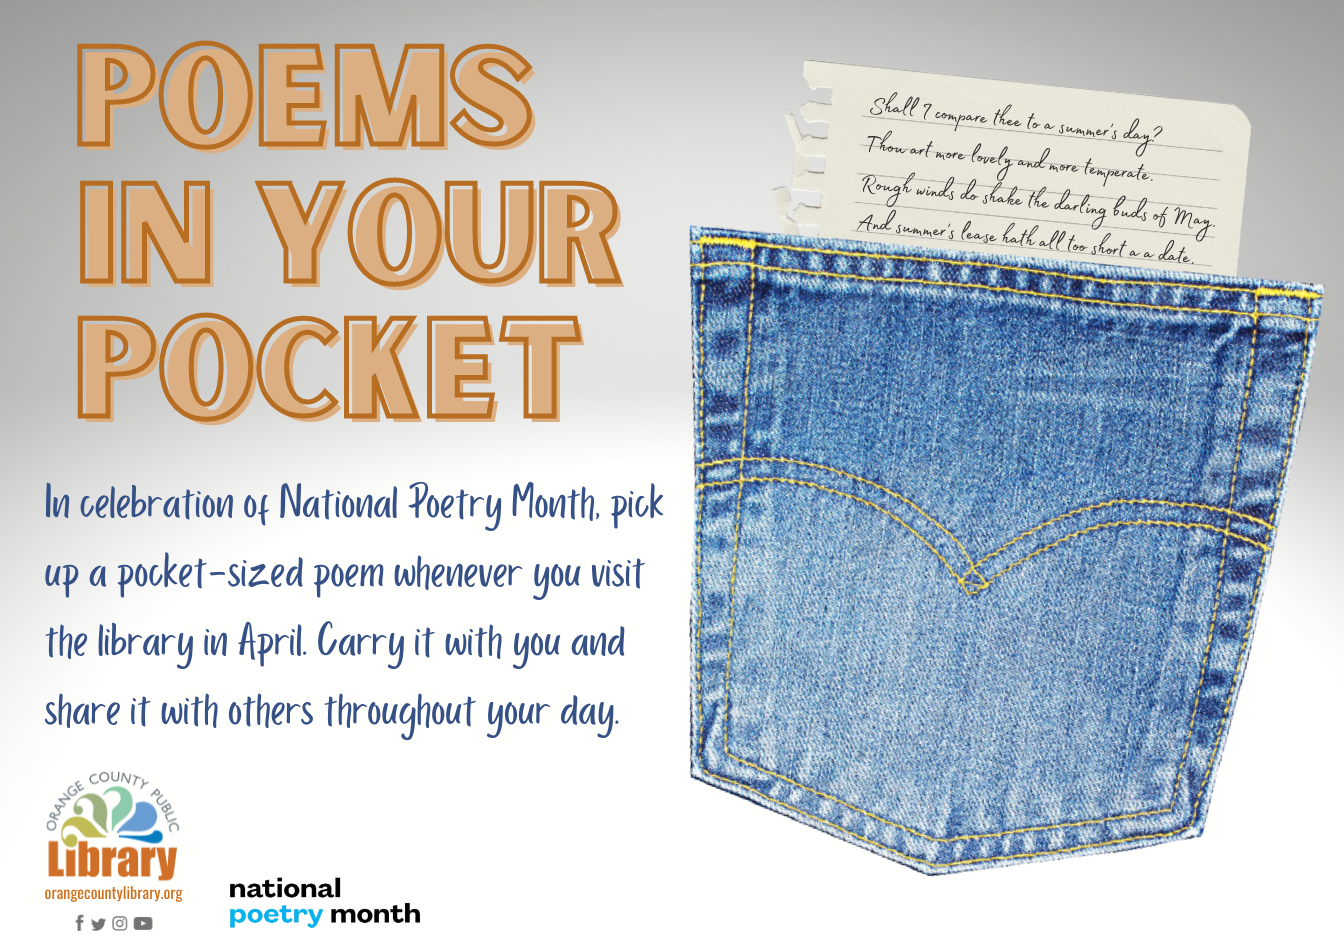 In celebration of National Poetry Month, pick up a pocket-sized poem whenever you visit the library in April. Carry it with you and share it with others throughout your day.